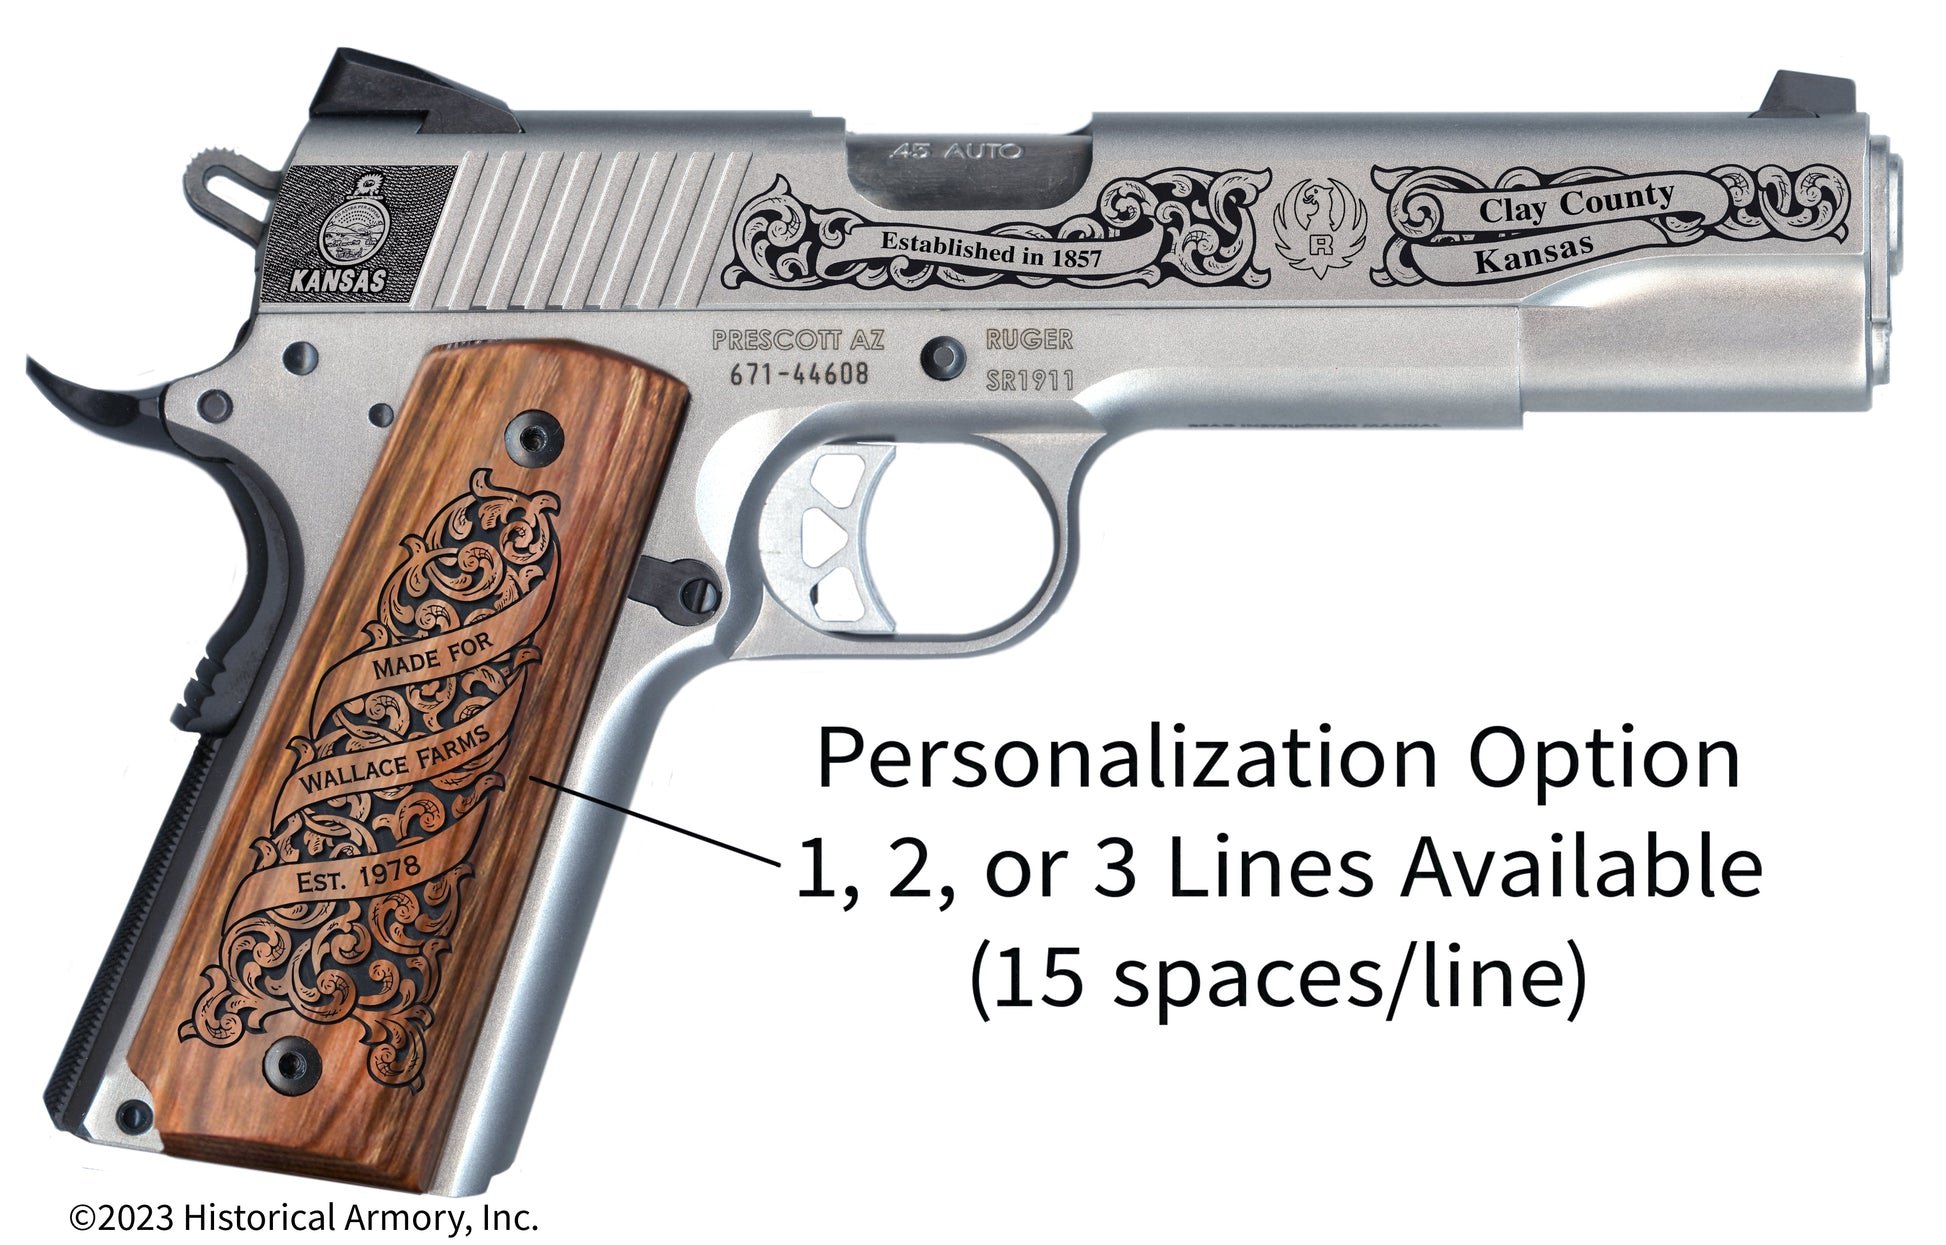 Clay County Kansas Personalized Engraved .45 Auto Ruger 1911